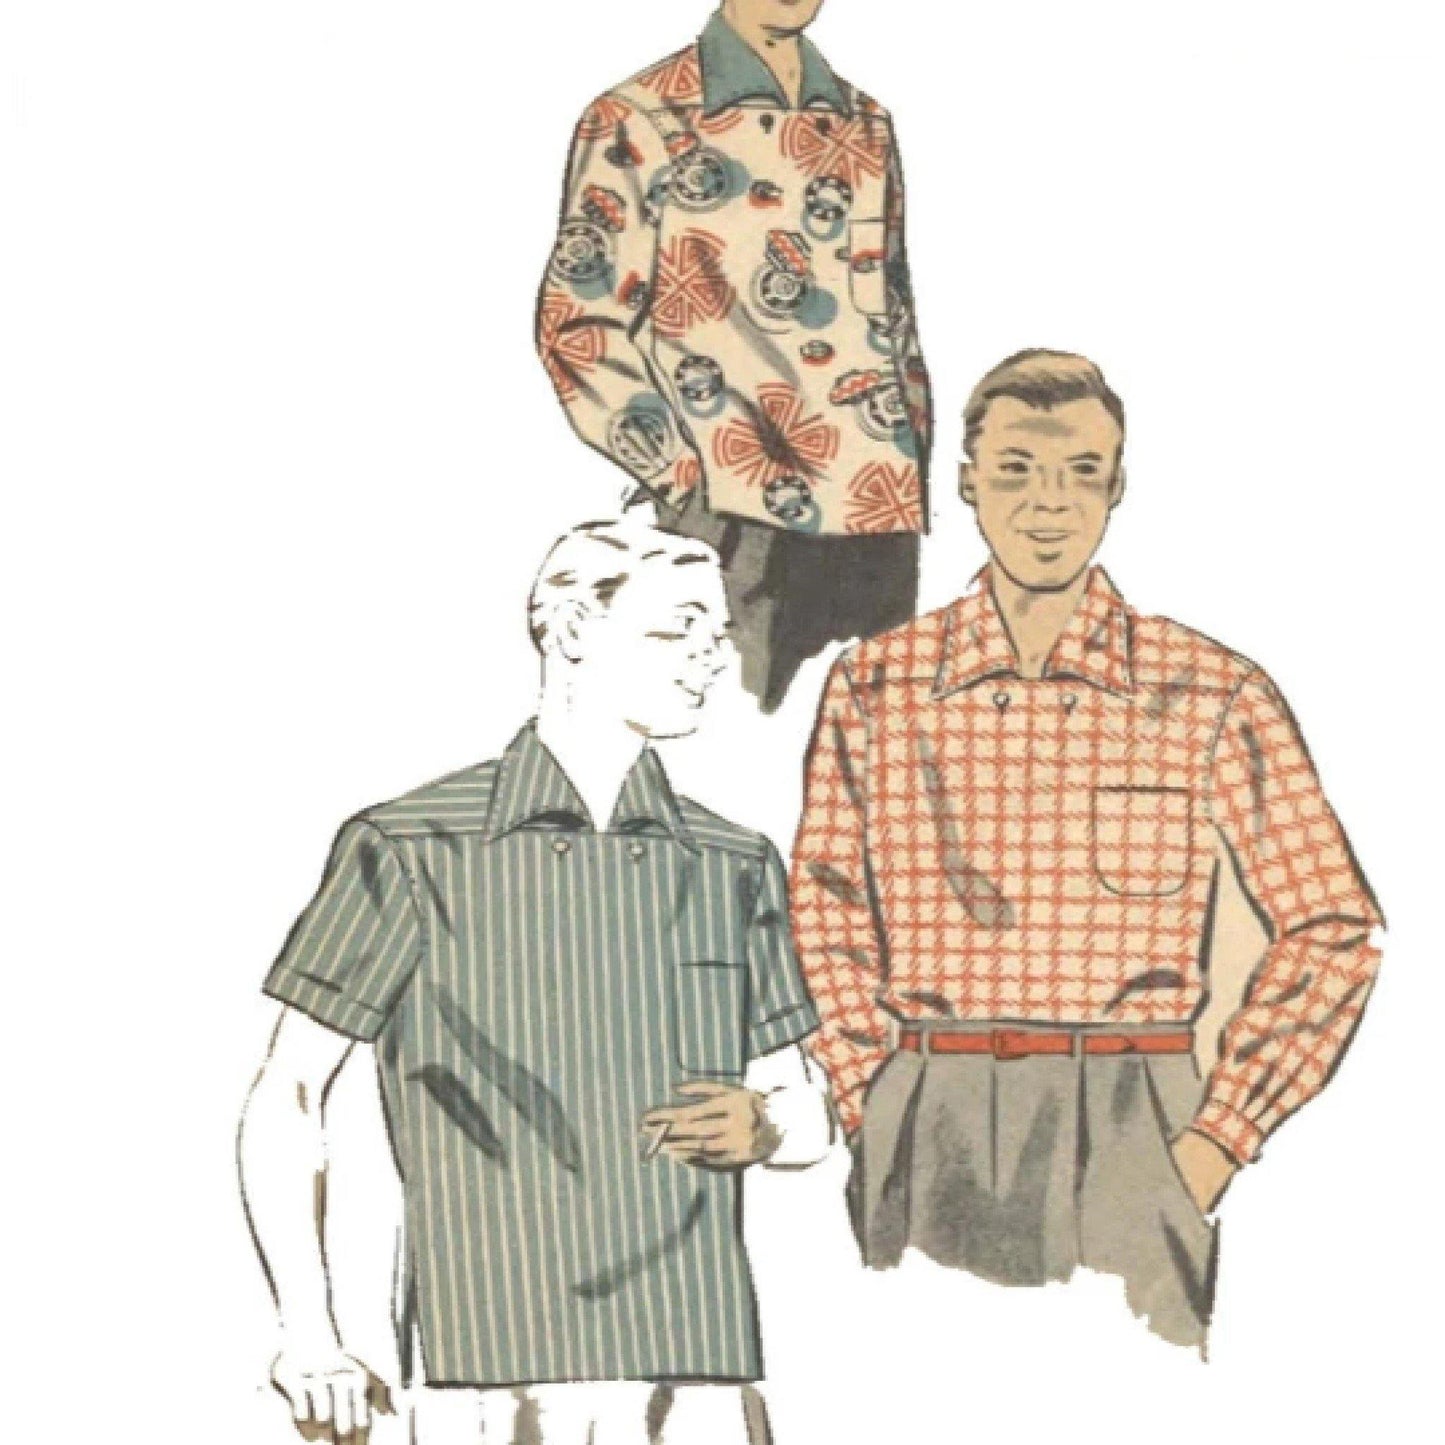 3 men wearing different version of the same shirt pattern. 1. checked shirt with chest pocket, collar and 2 buttoned flap opening . 1 same shirt different print and contrasting blue collar and the 3rd man is wearing a striped short where the stripes change direction on shoulder yoke to body and sleeves.